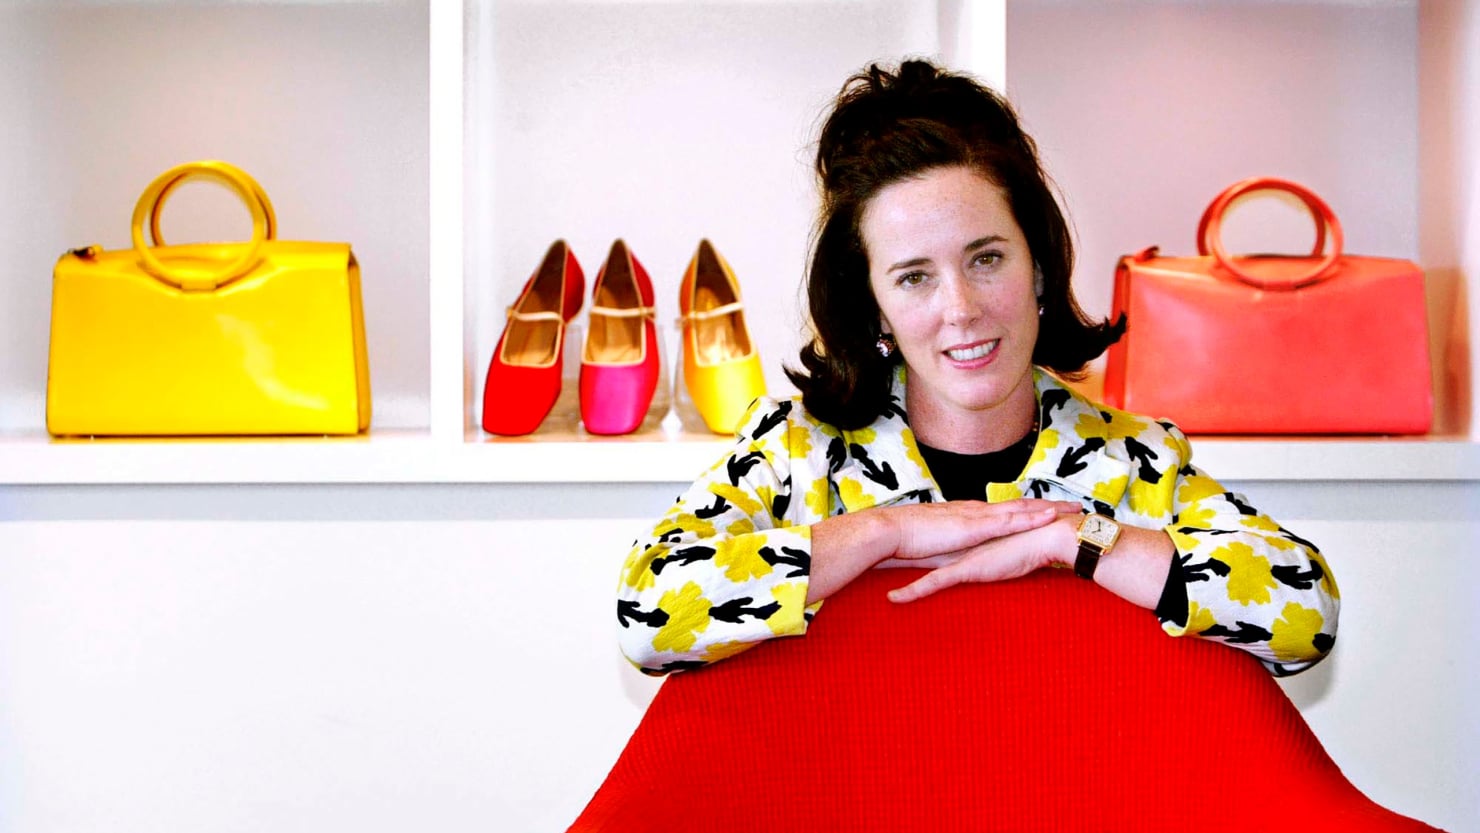 Kate spade committed suicide after a lengthy battle with depression.